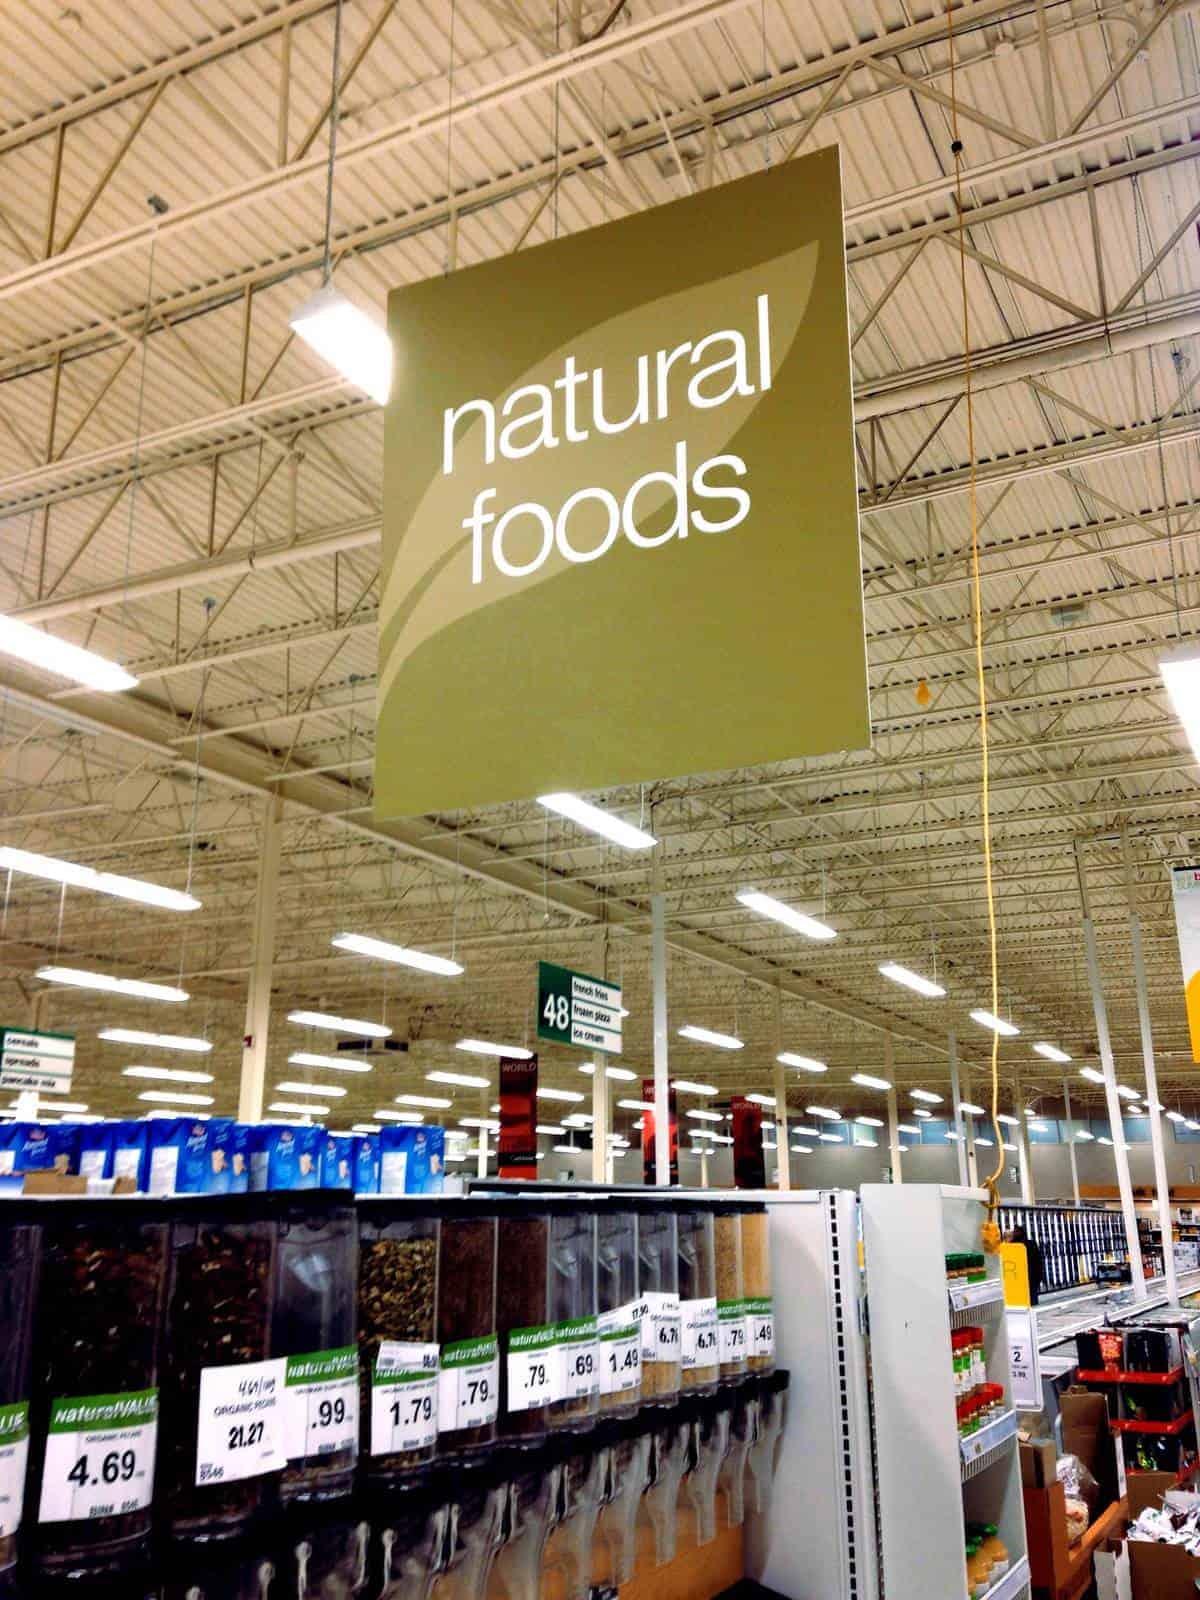 Grocery store sign: "Natural foods"